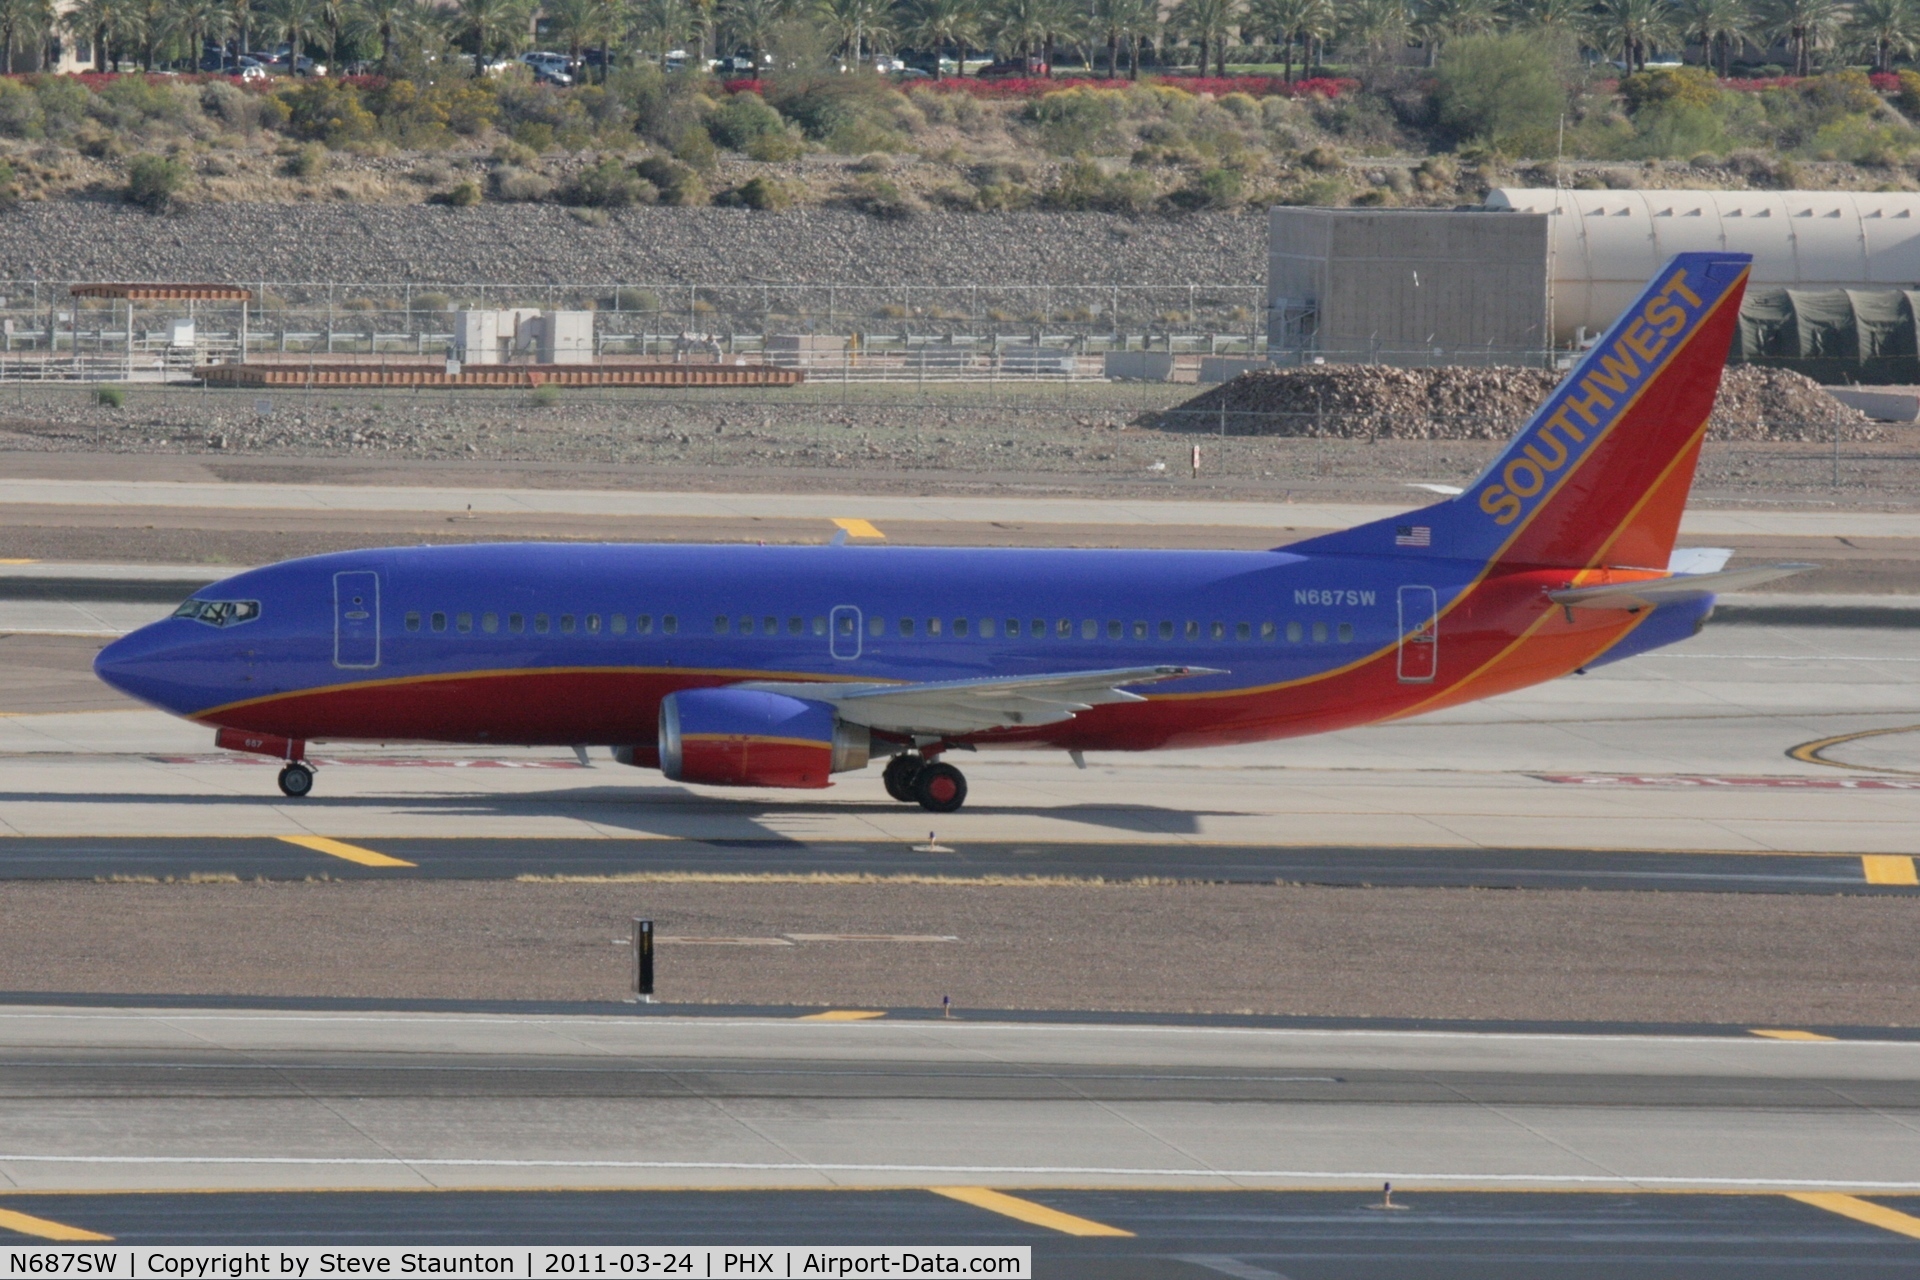 N687SW, 1986 Boeing 737-3Q8 C/N 23388, Taken at Phoenix Sky Harbor Airport, in March 2011 whilst on an Aeroprint Aviation tour